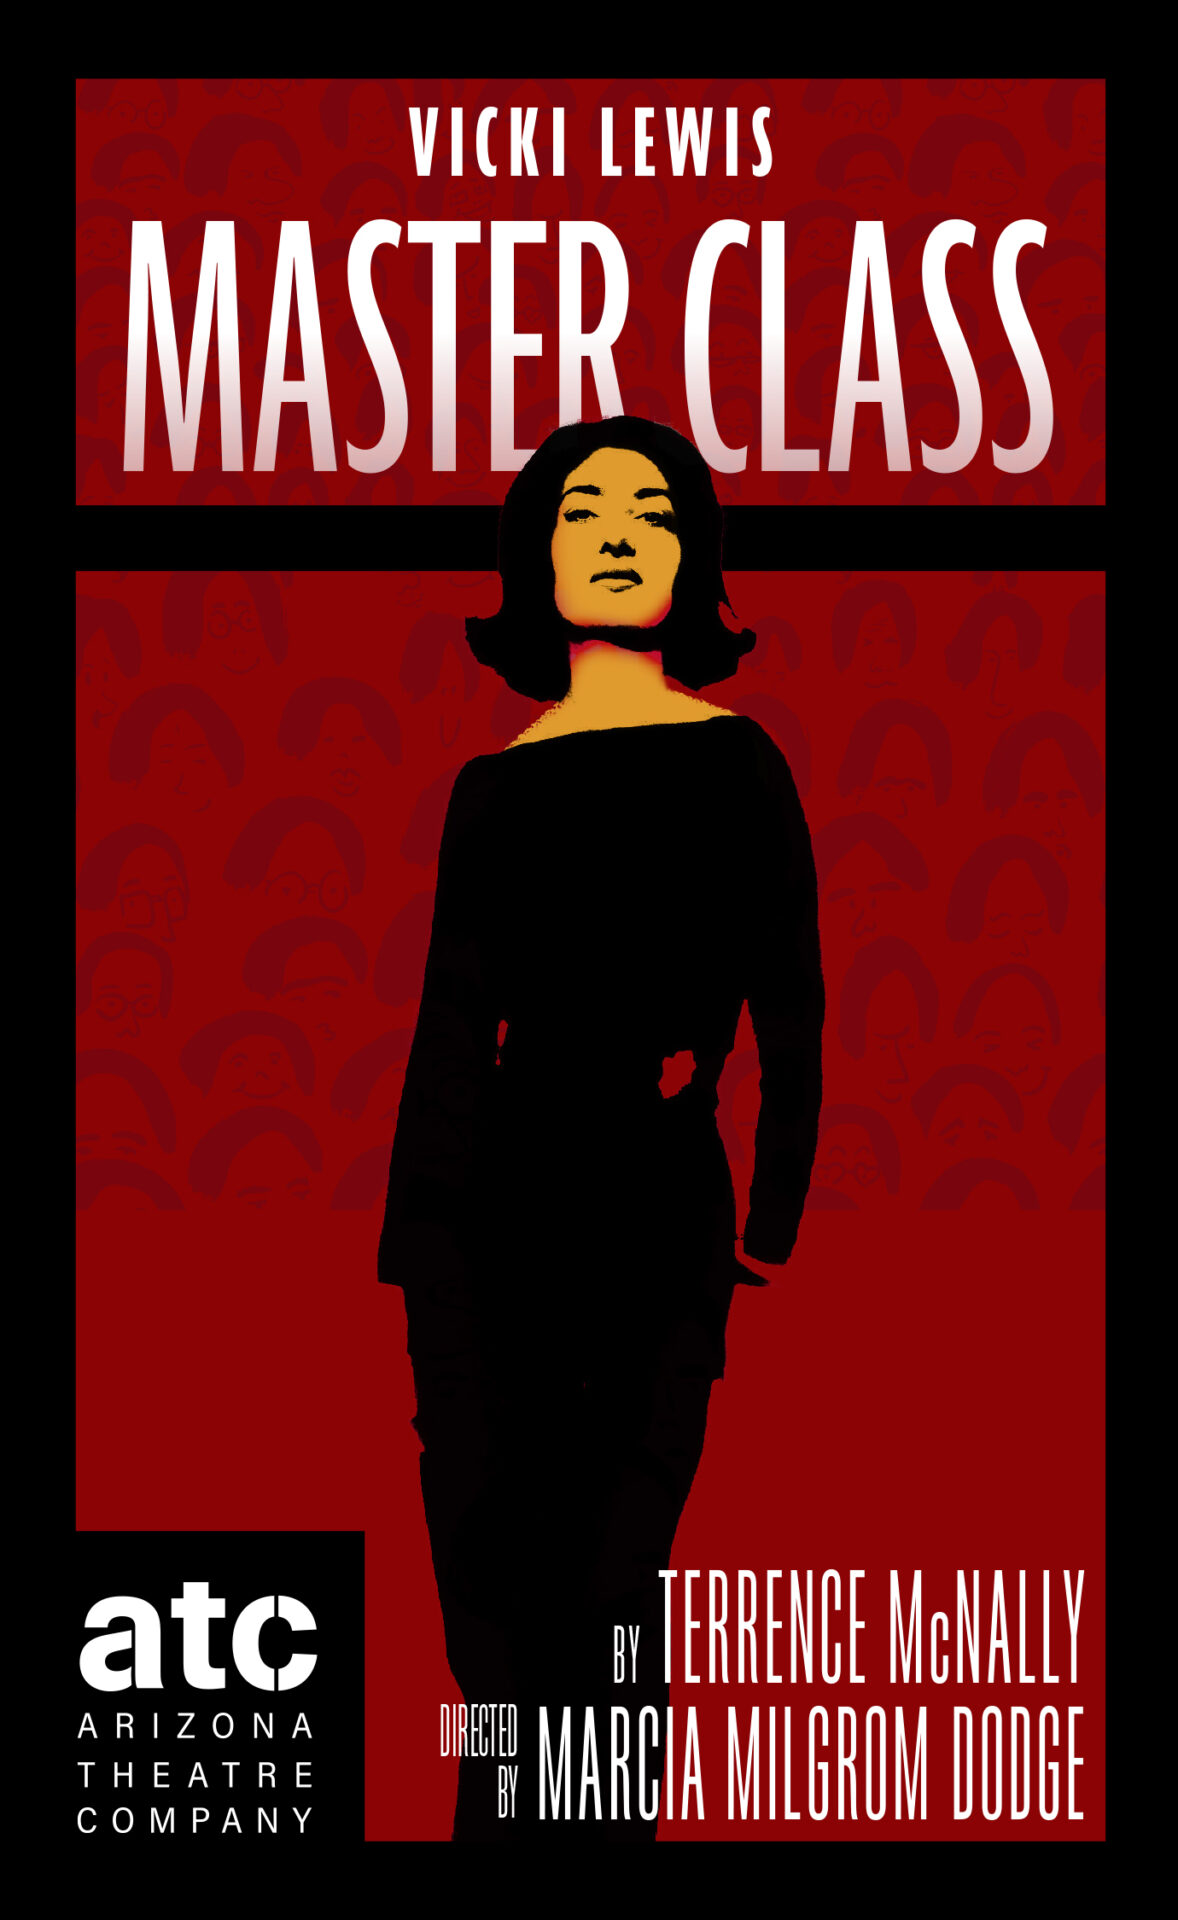 Master Class Performing Arts